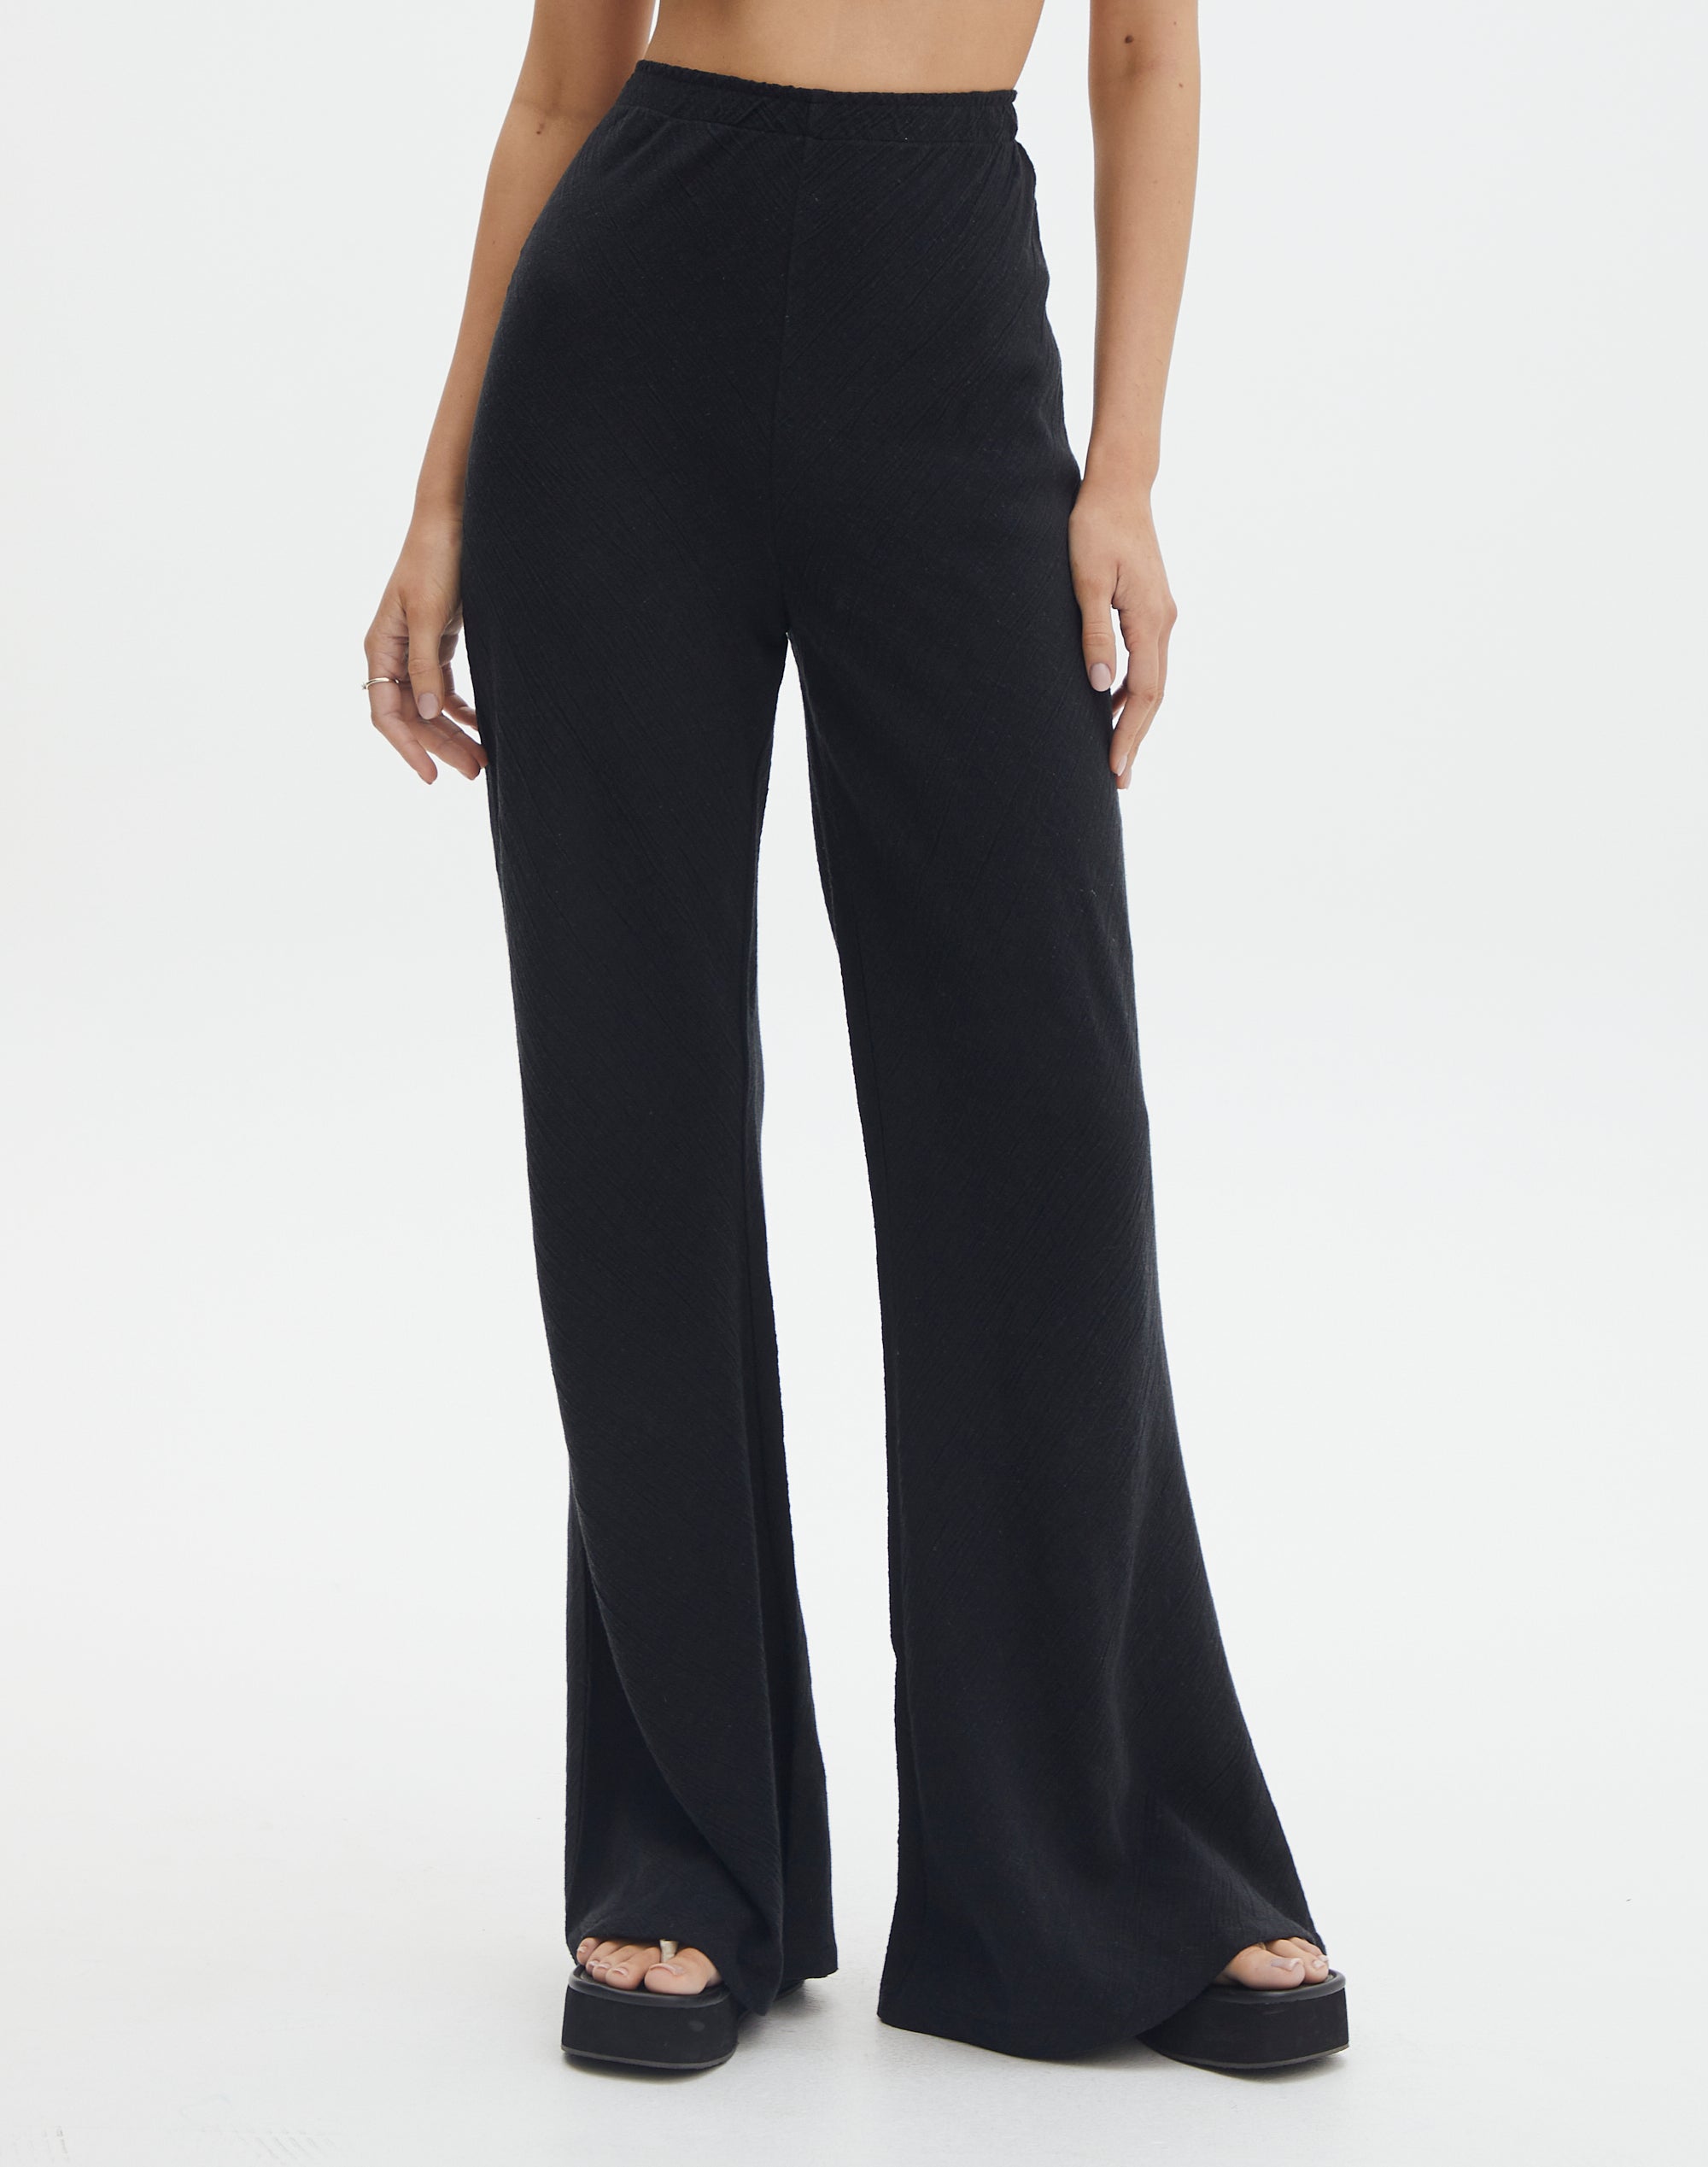 https://www.glassons.com/content/products/co-crizzy-pant-black-full-pw118952cot.jpg